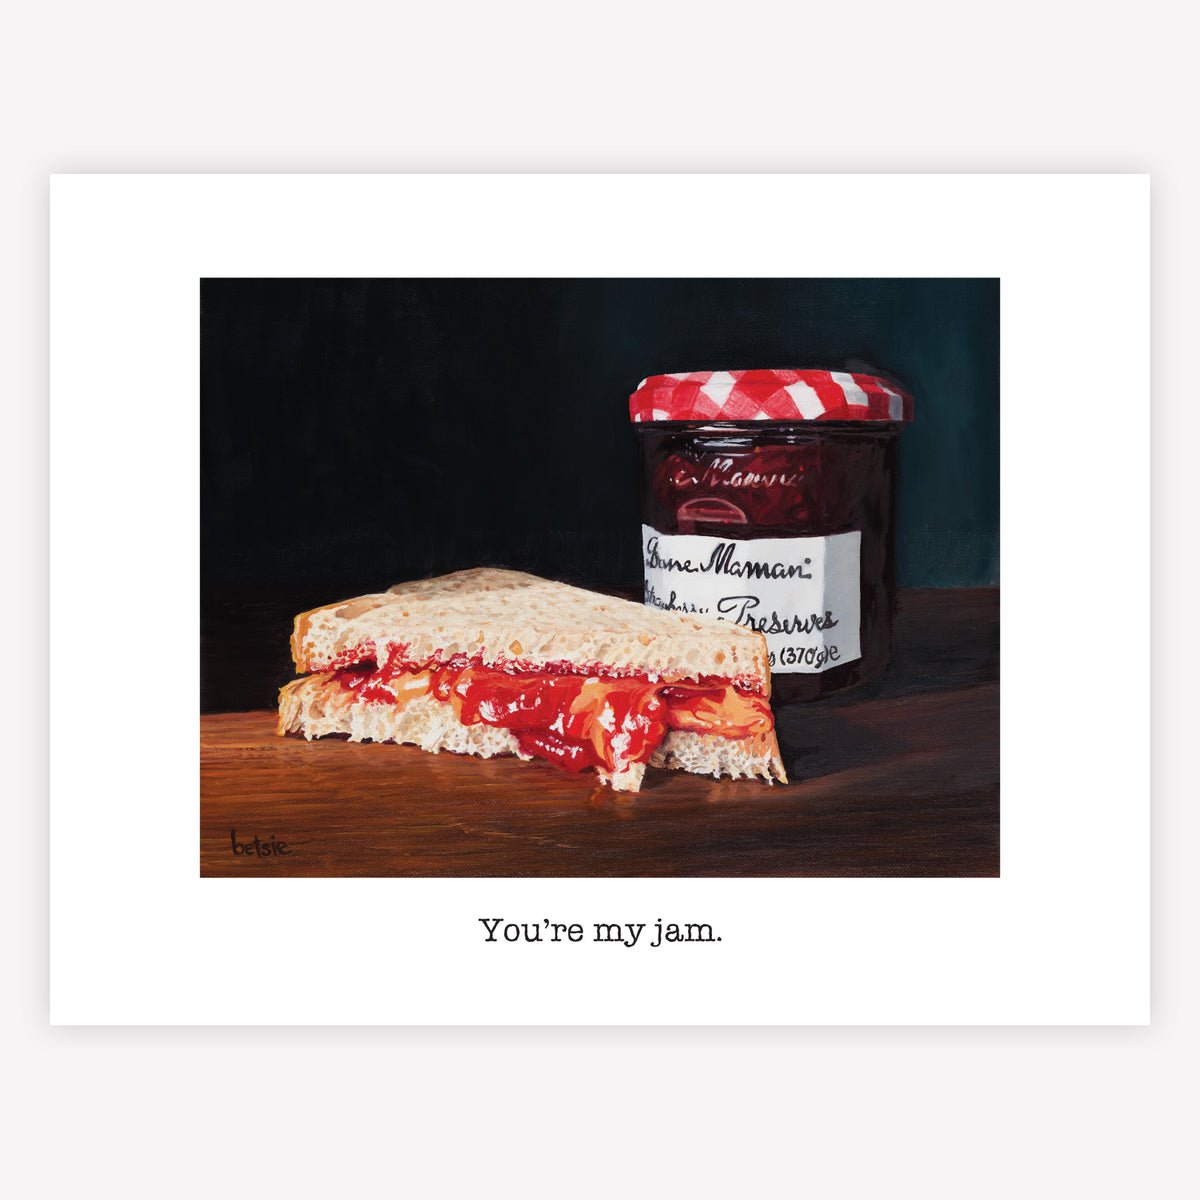 "You're my jam" Greeting Card